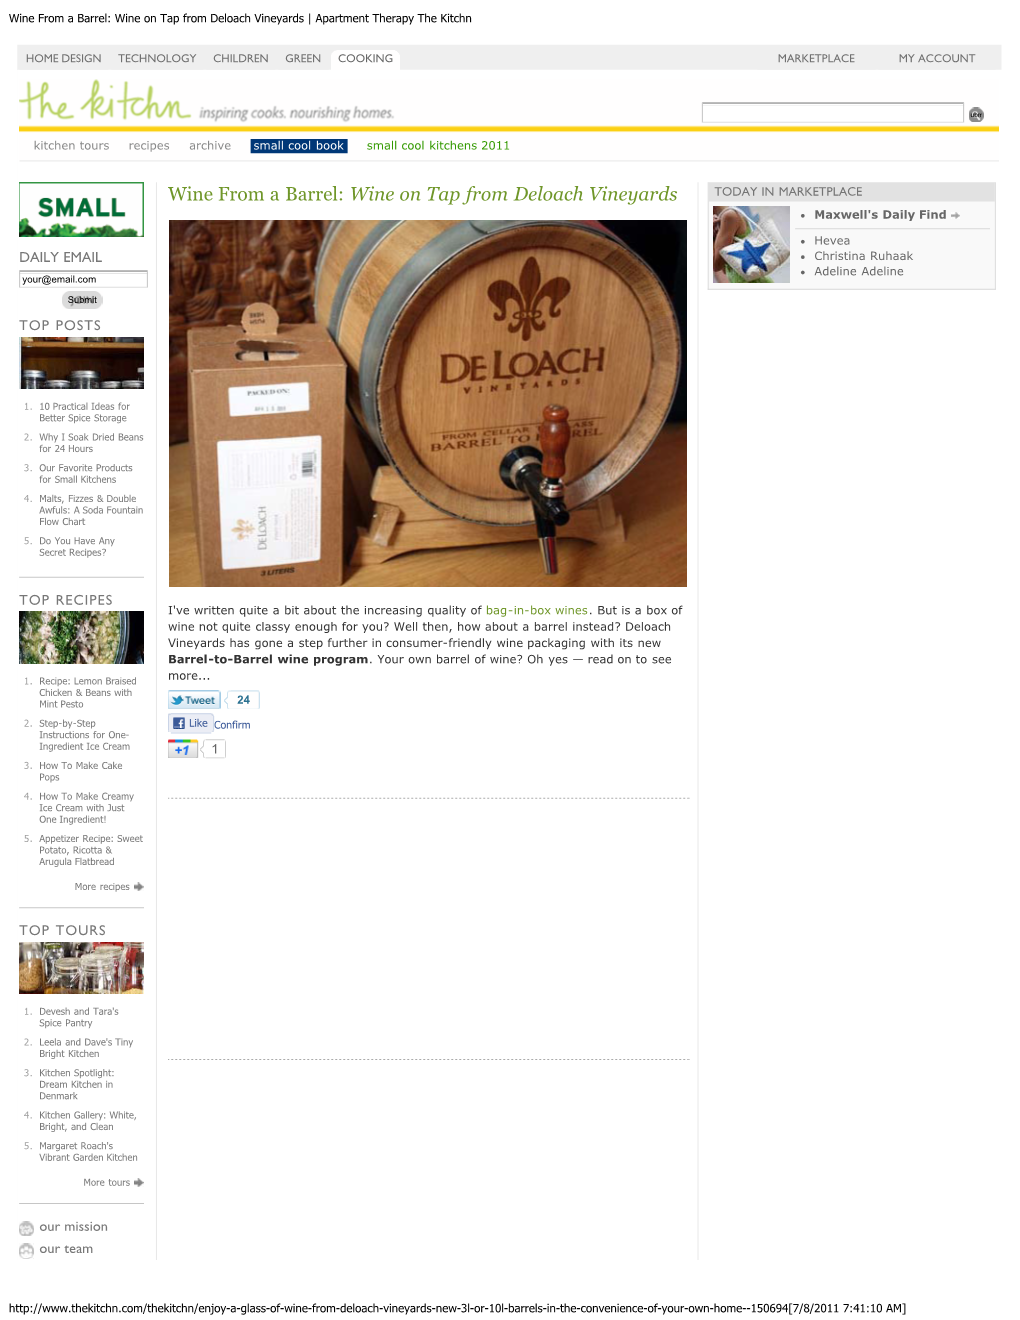 Wine from a Barrel: Wine on Tap from Deloach Vineyards | Apartment Therapy the Kitchn